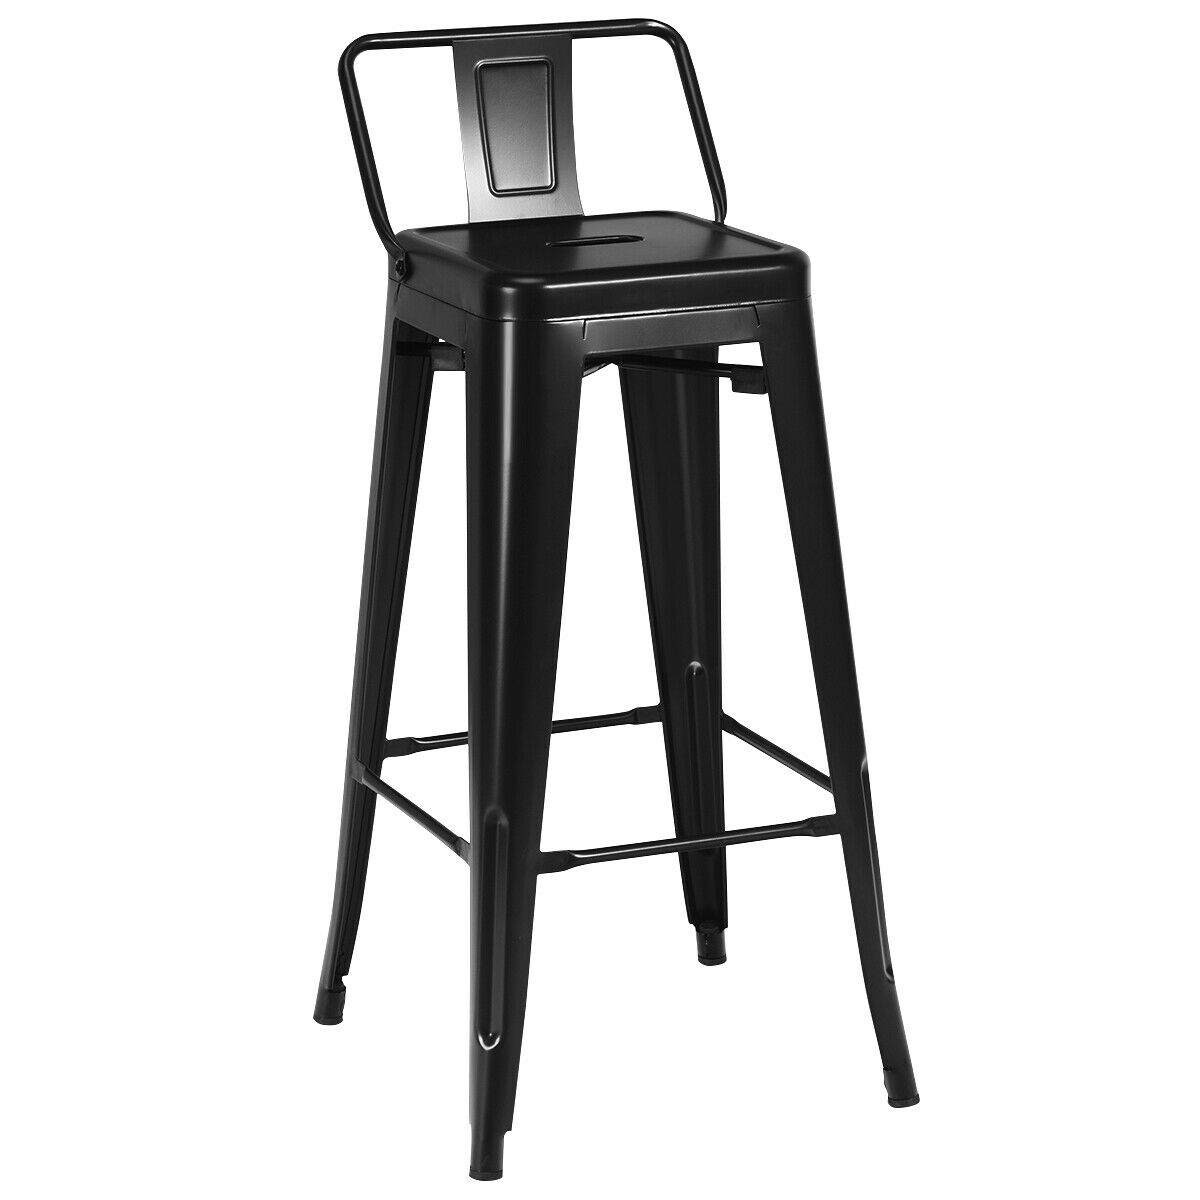 stackable chair metal frame backrest stool coffee chair